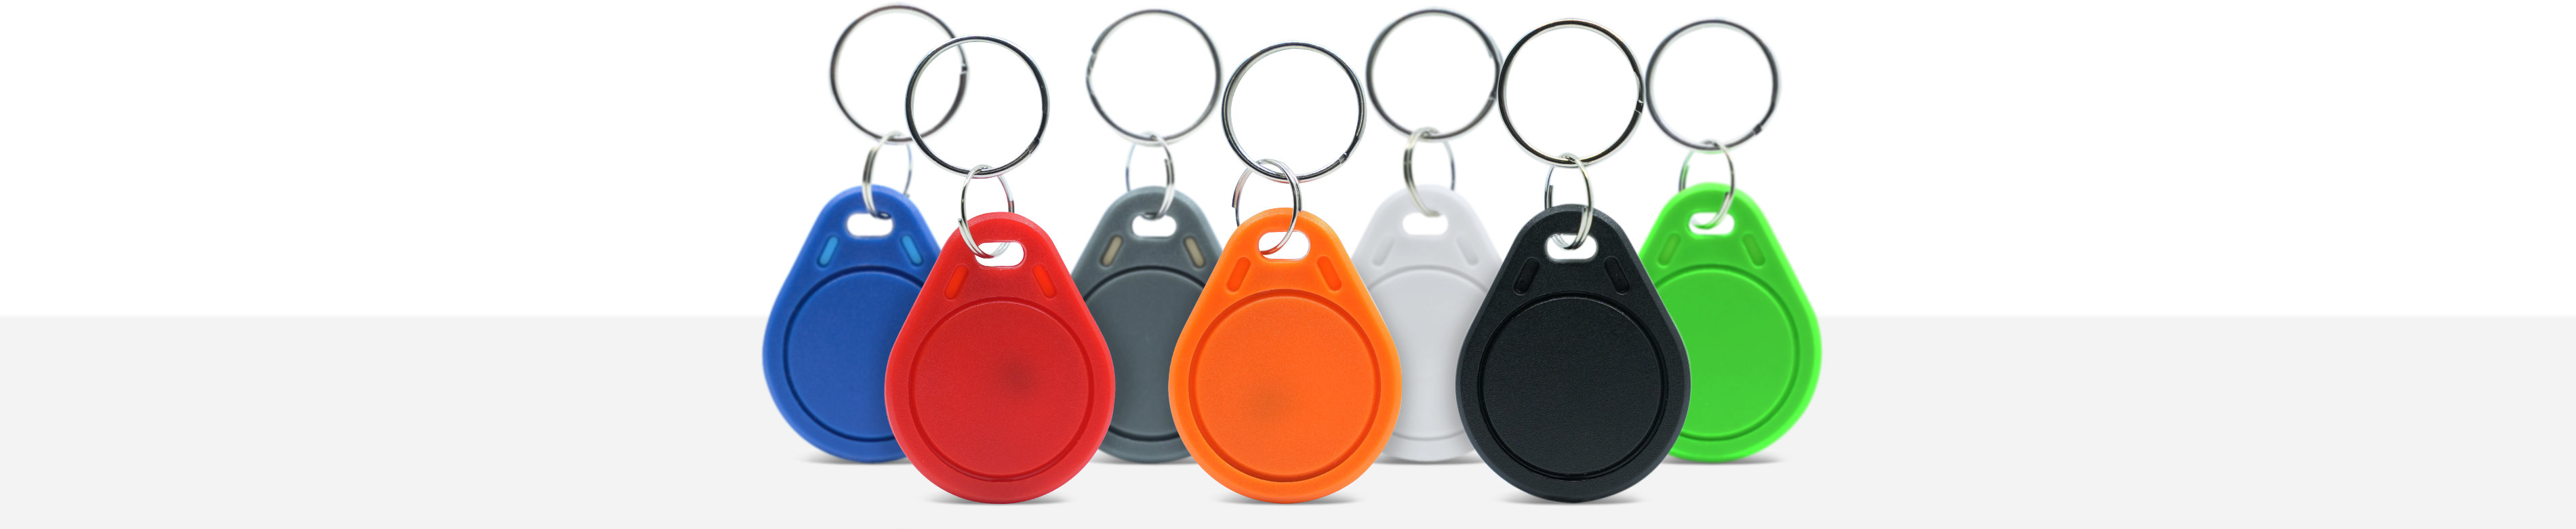 NFC ABS key fob in various colours